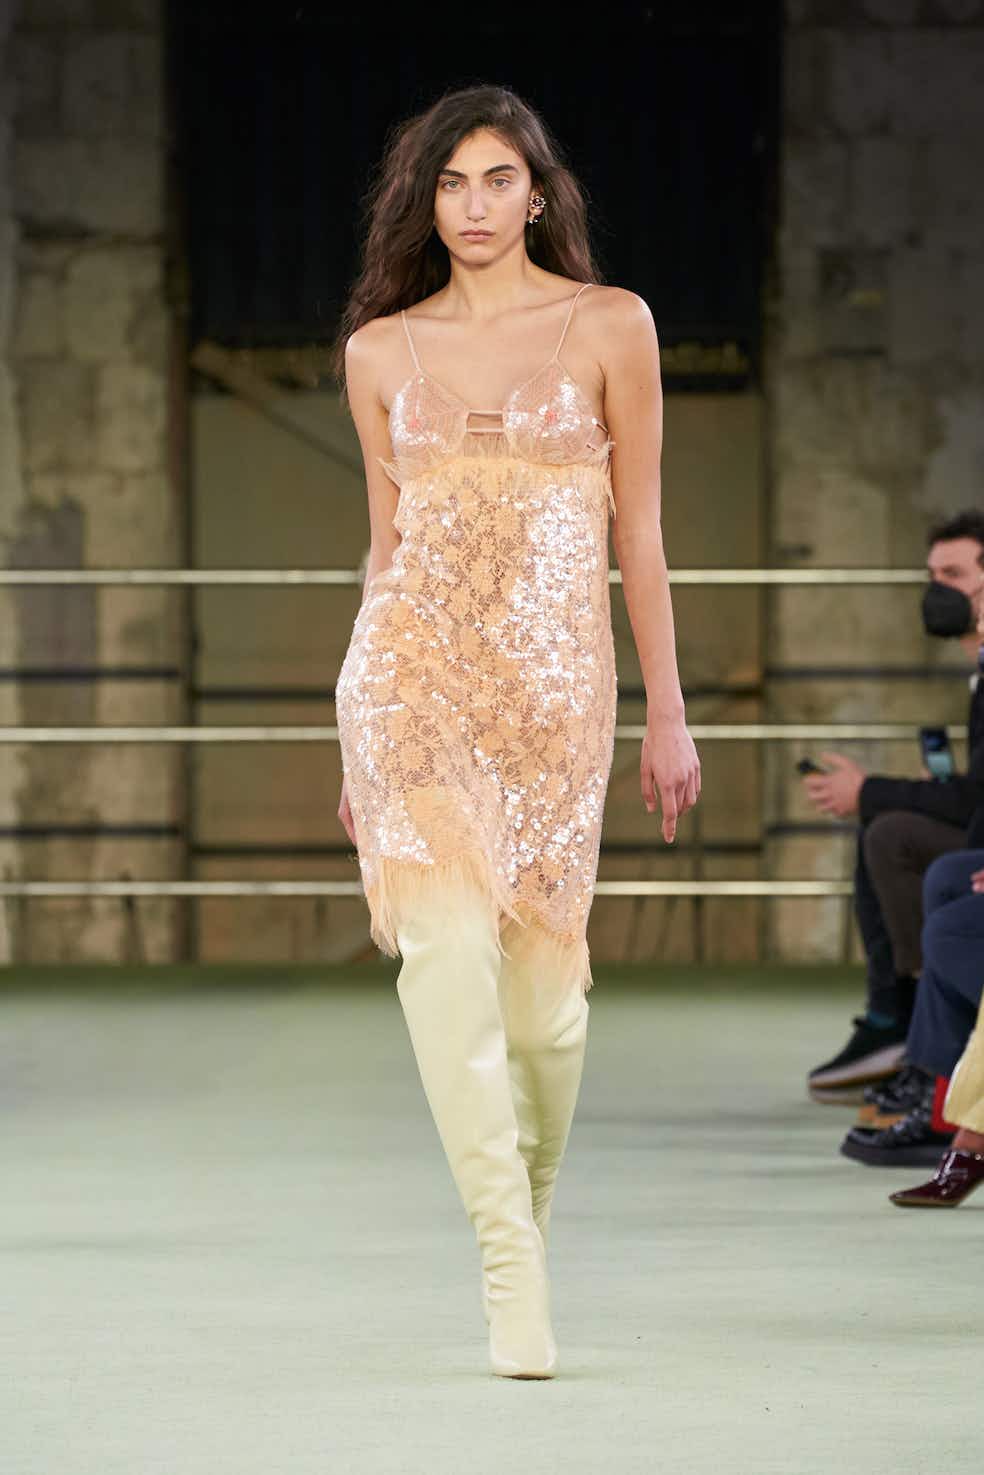 A catwalk at Milan Fashion Week has featured models with three breasts.